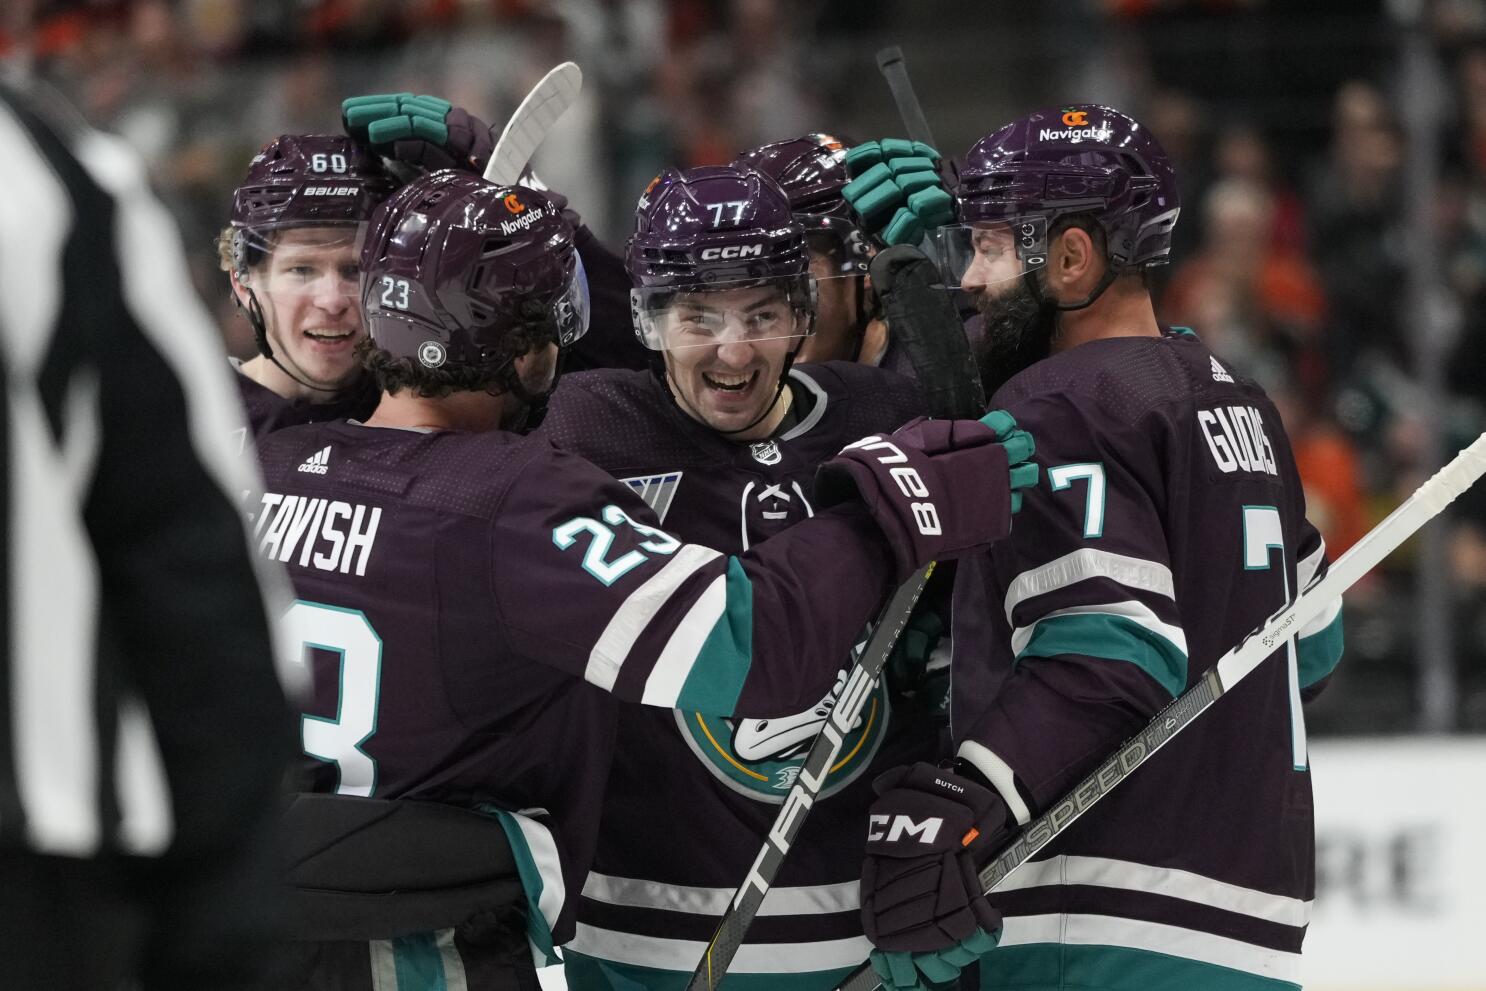 Deconstructing the Mighty Ducks' hockey league and its playoff